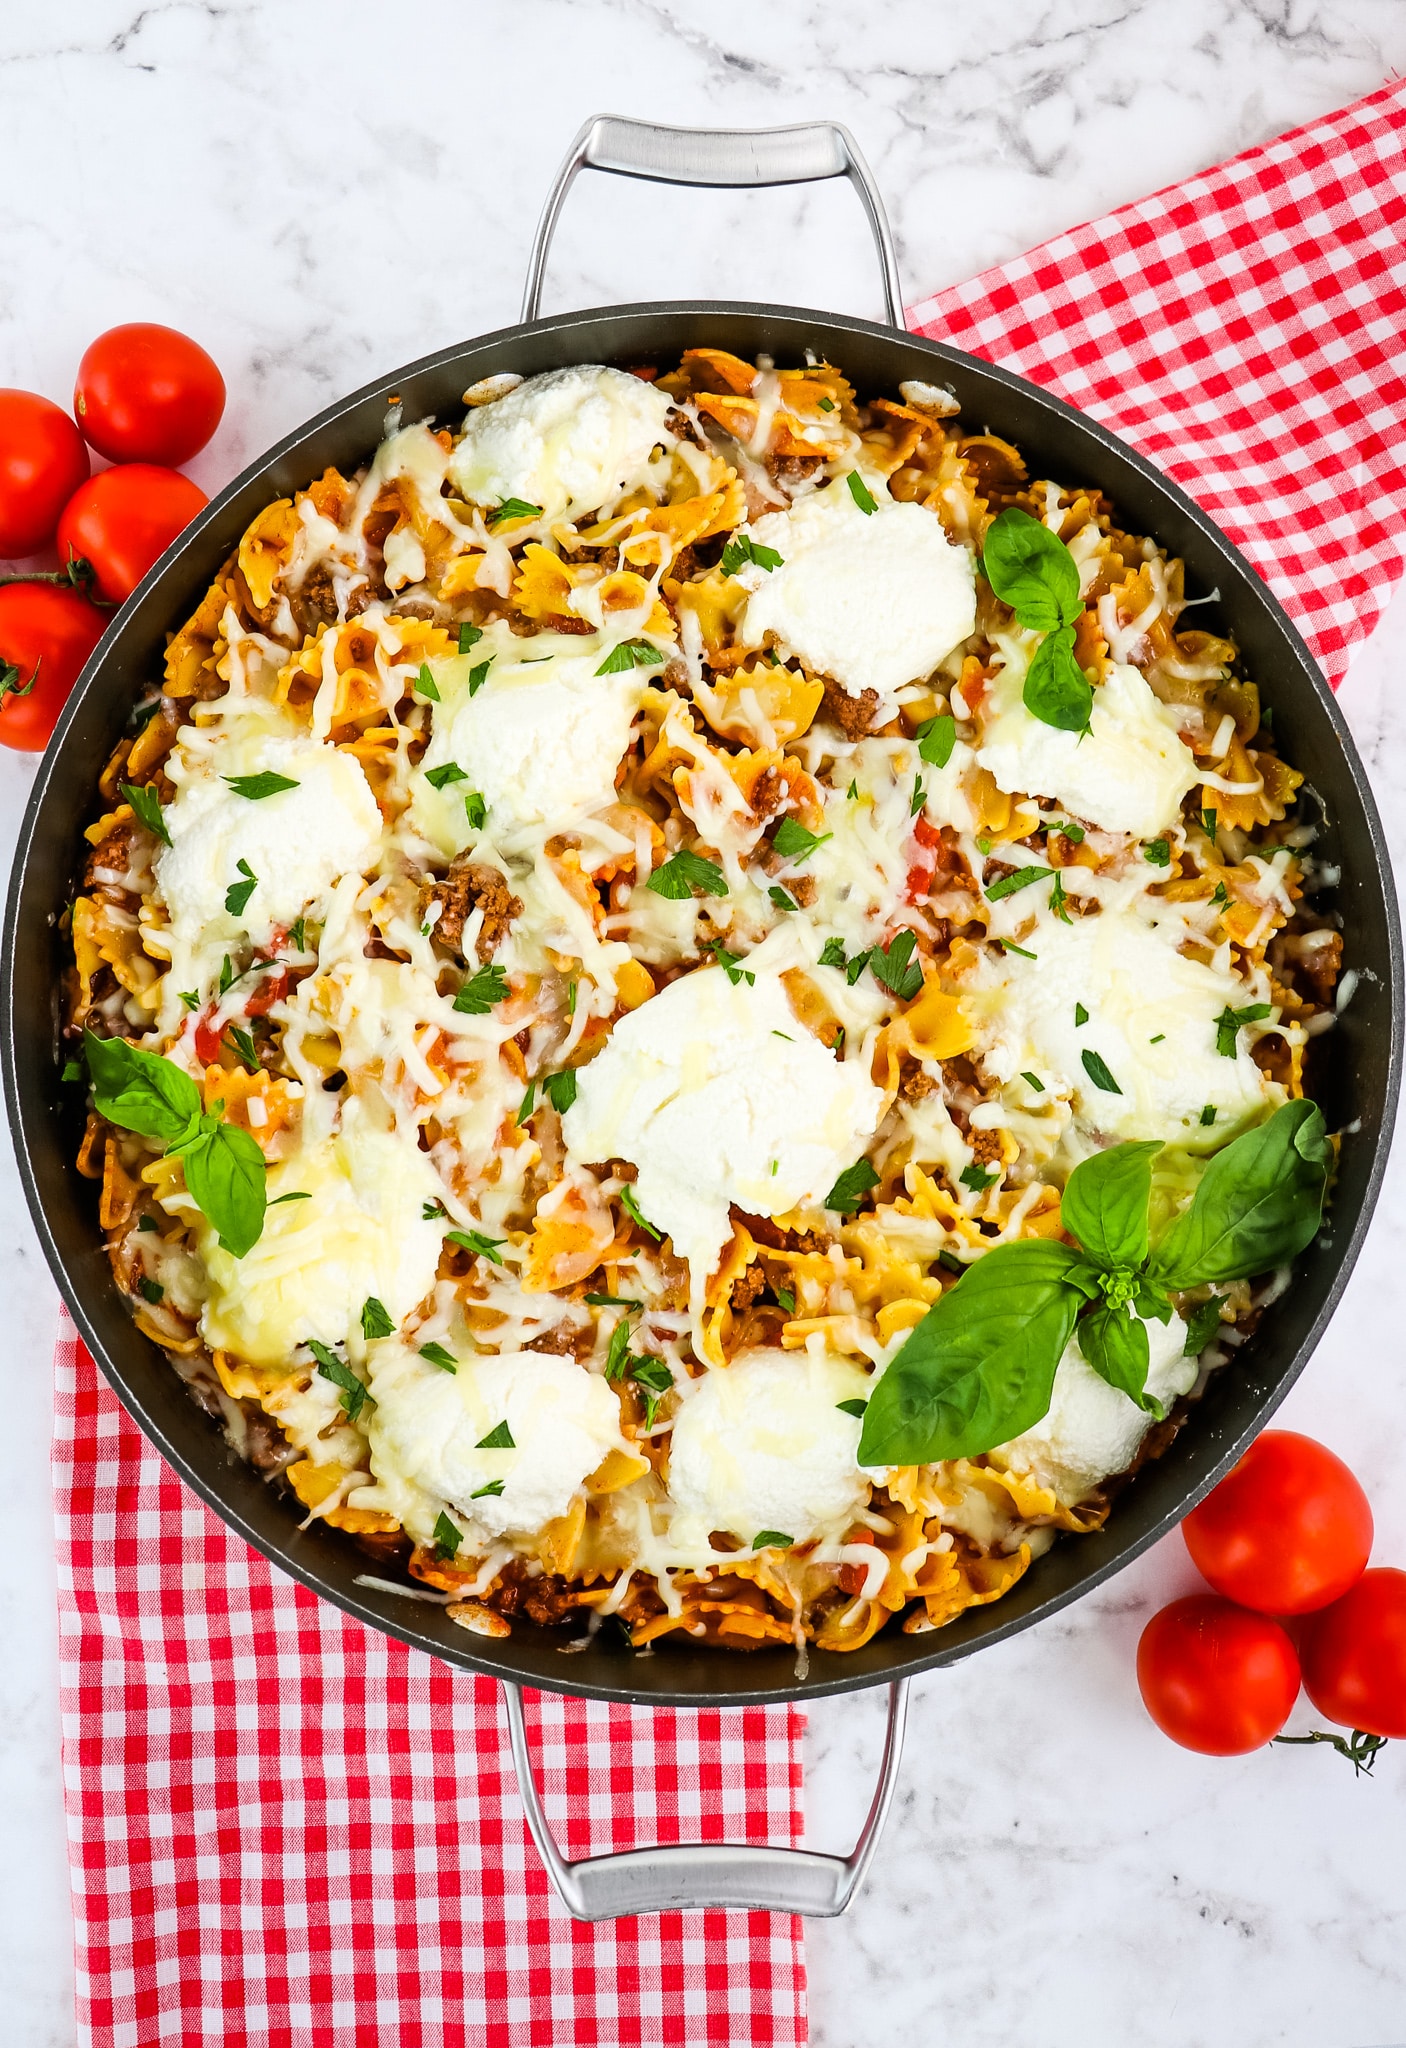 Skillet lasagna topped with fresh basil leaves.